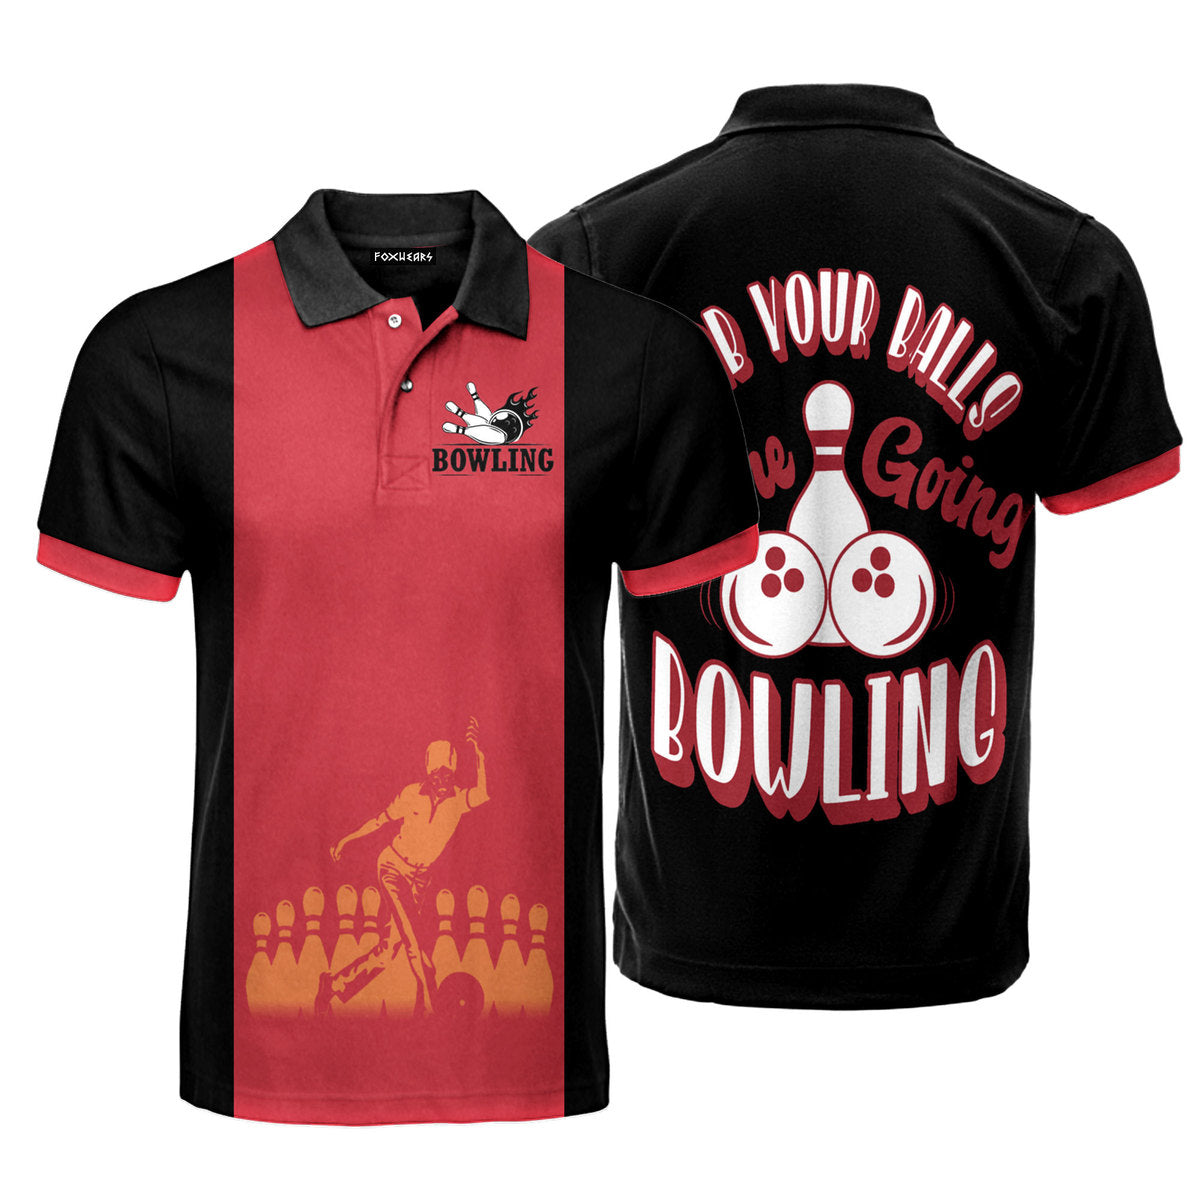 We Going Bowling Funny Player Polo Shirt For Men